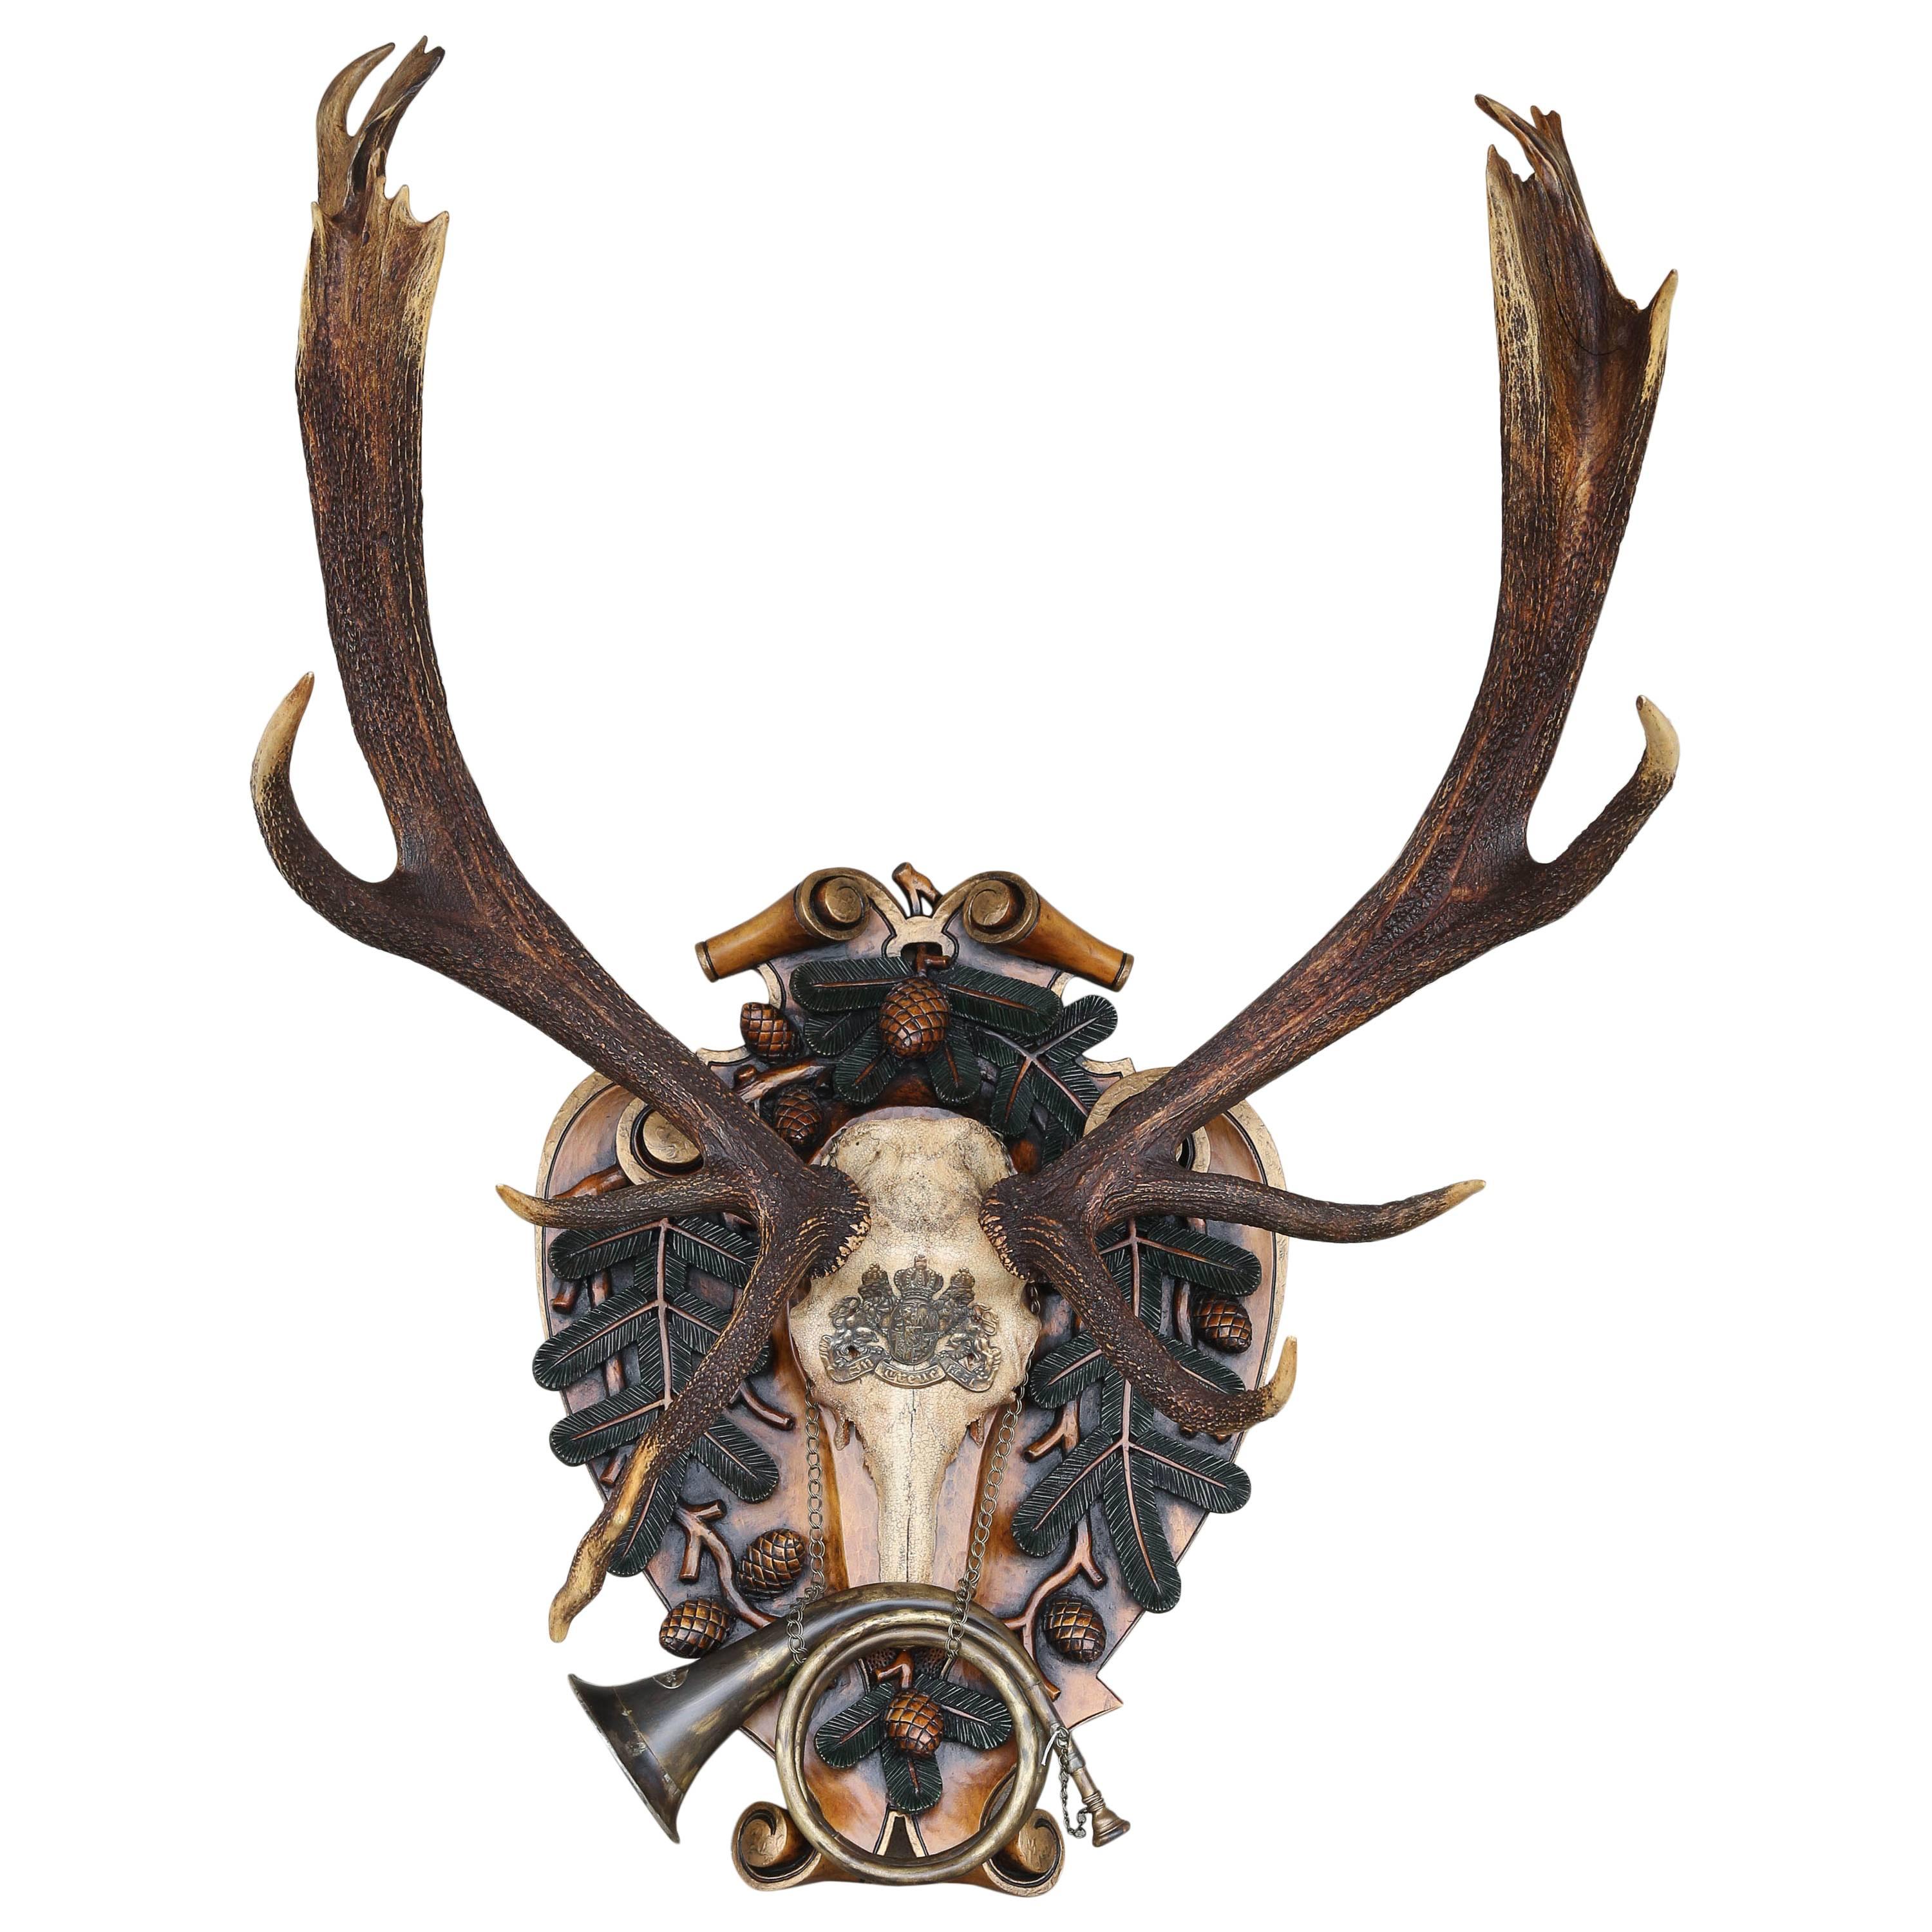 German Red Stag from Eulenburg Hunt of 1892 with Original Fürst-Pless Hunt Horn